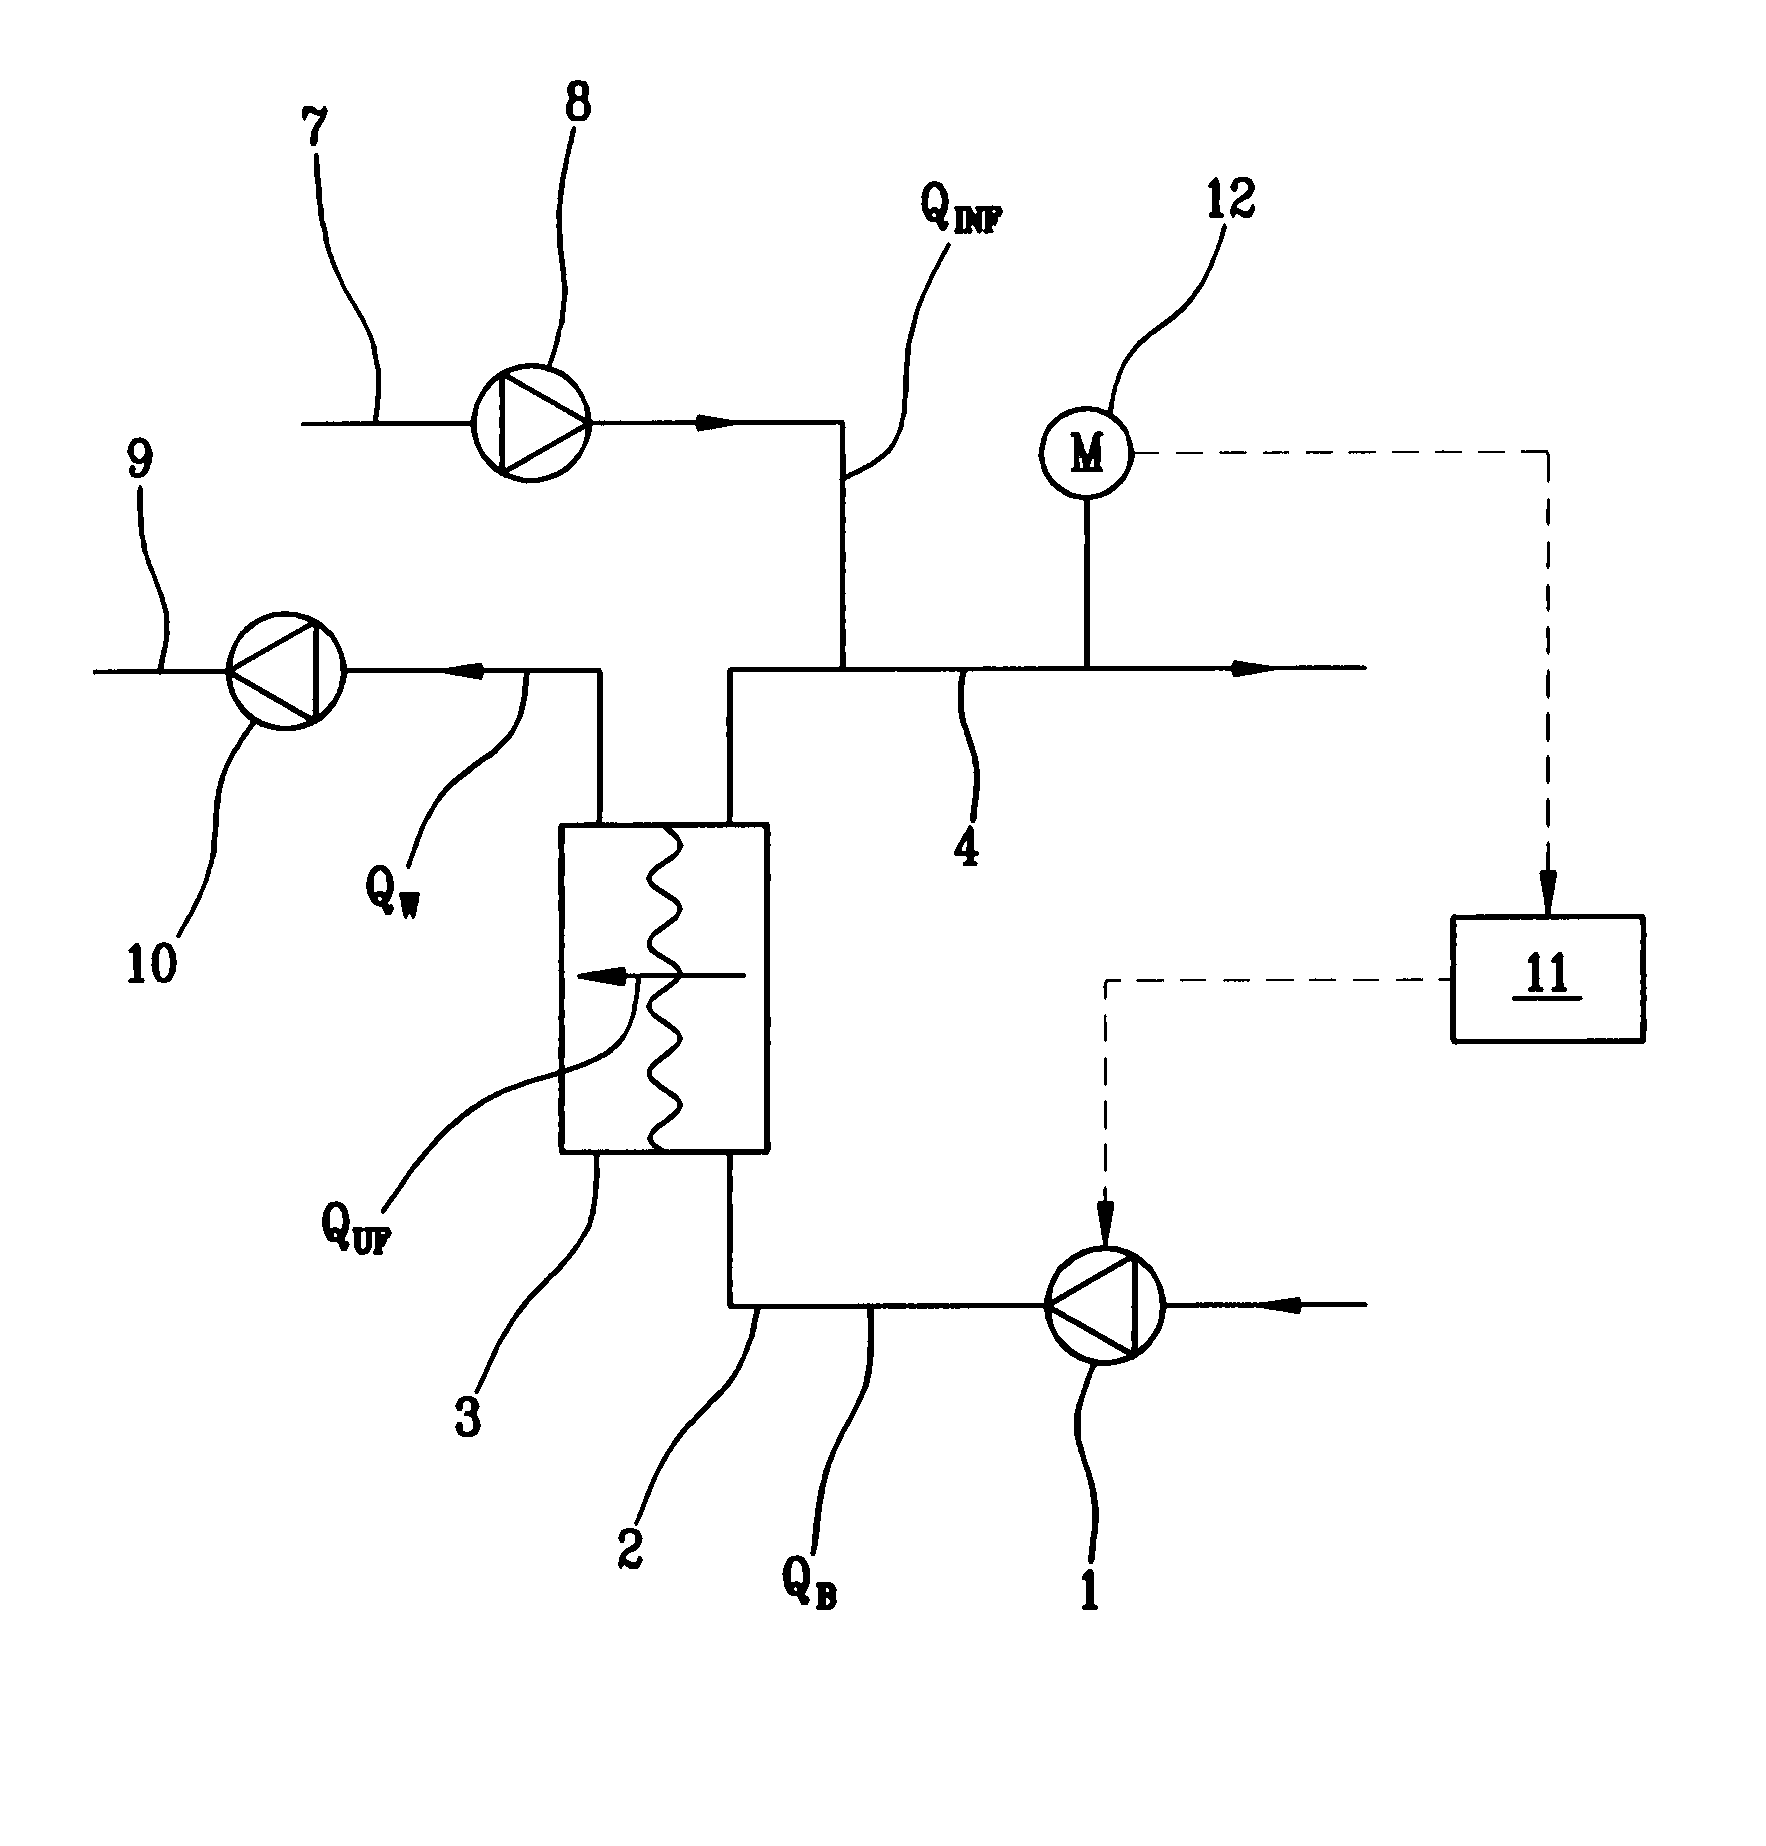 Hemodialysis or hemo(dia)filtration apparatus and a method for controlling a hemodialysis or hemo(dia)filtration apparatus